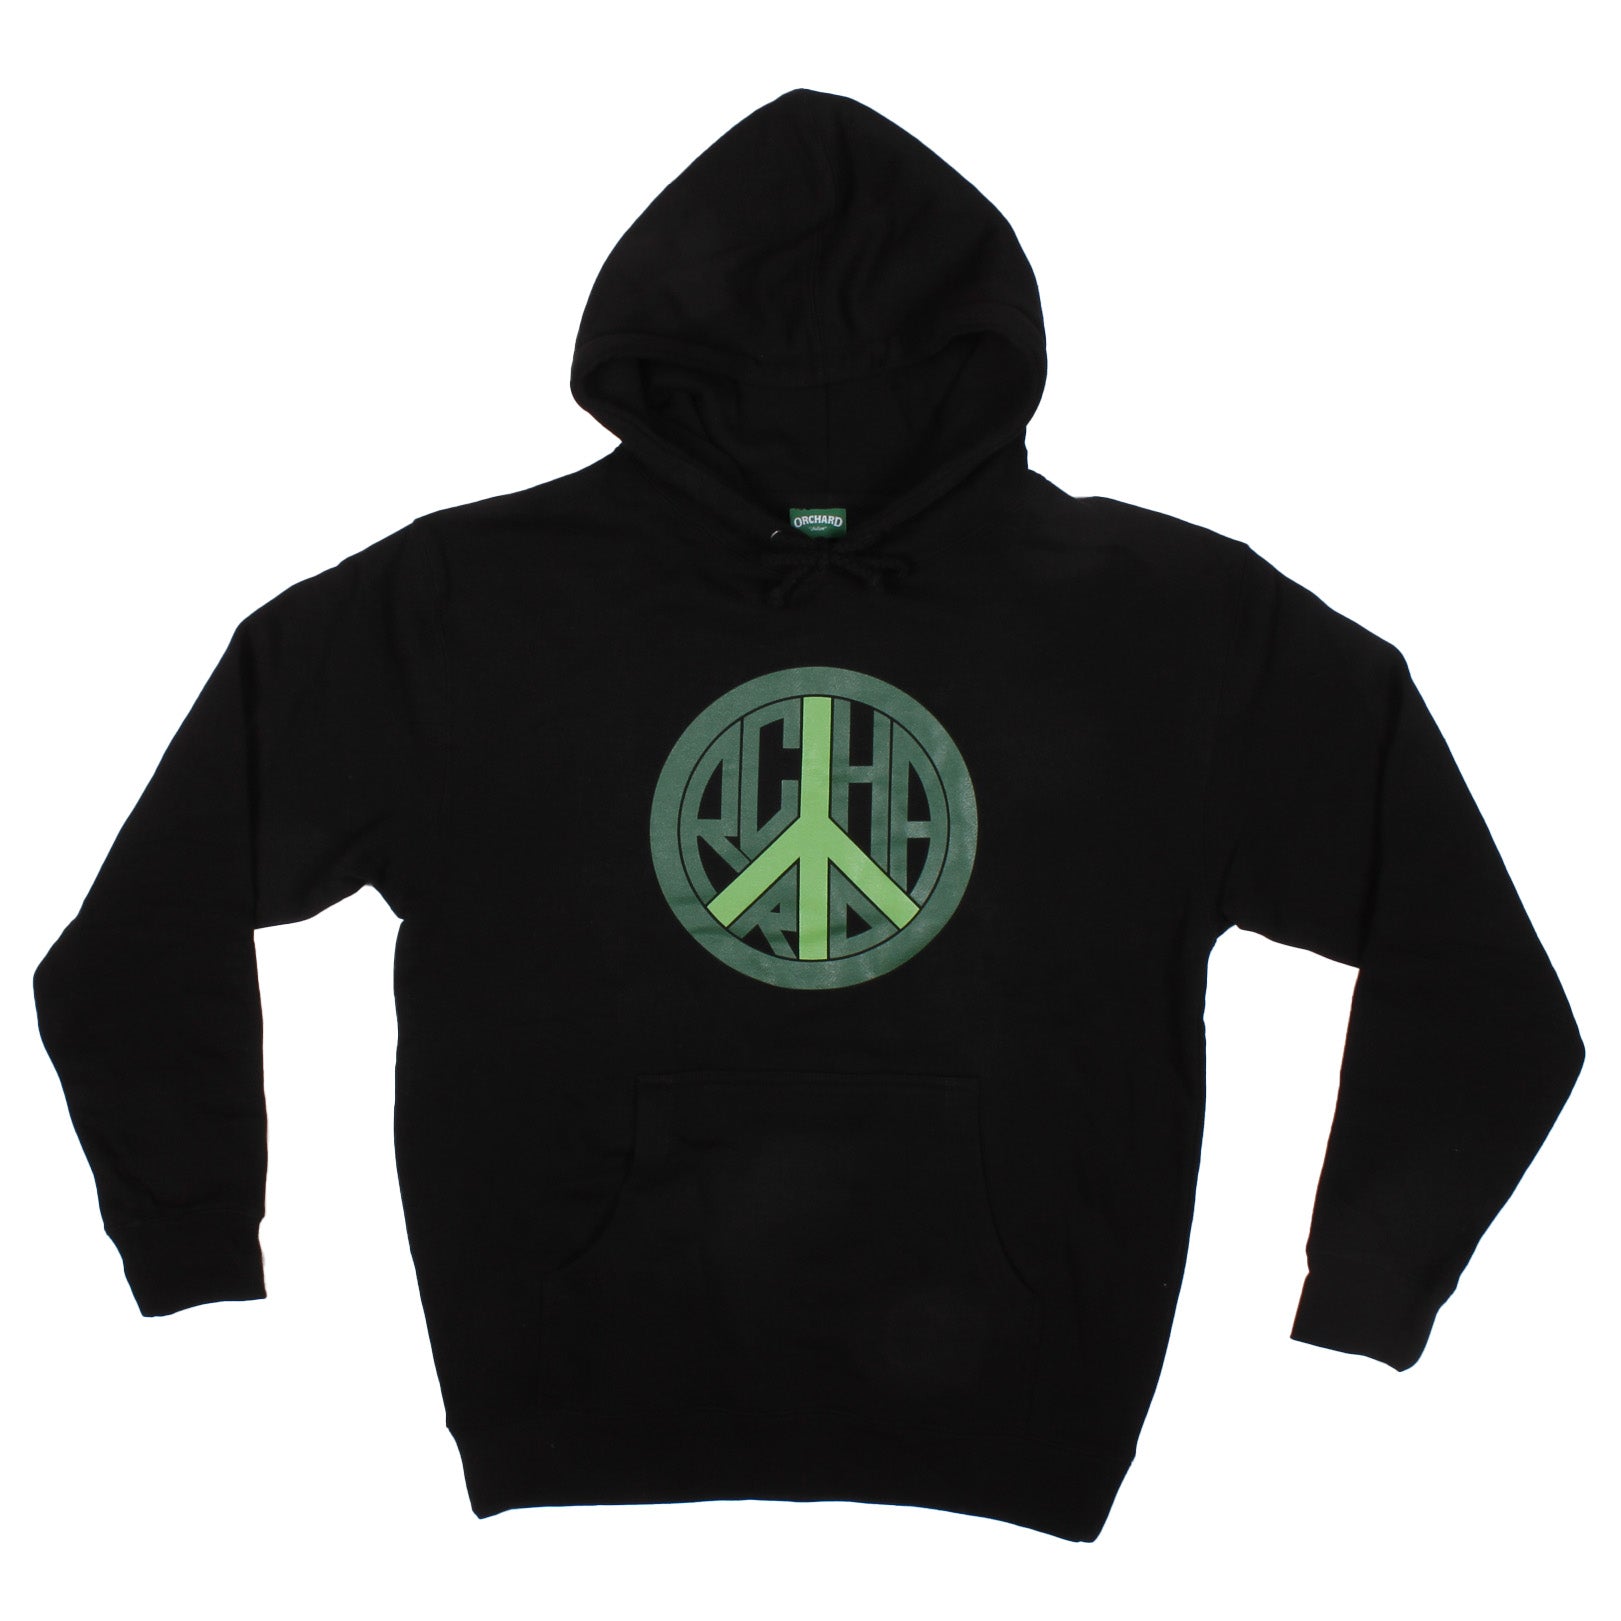 Orchard Peace by Damion Silver Hoodie Black